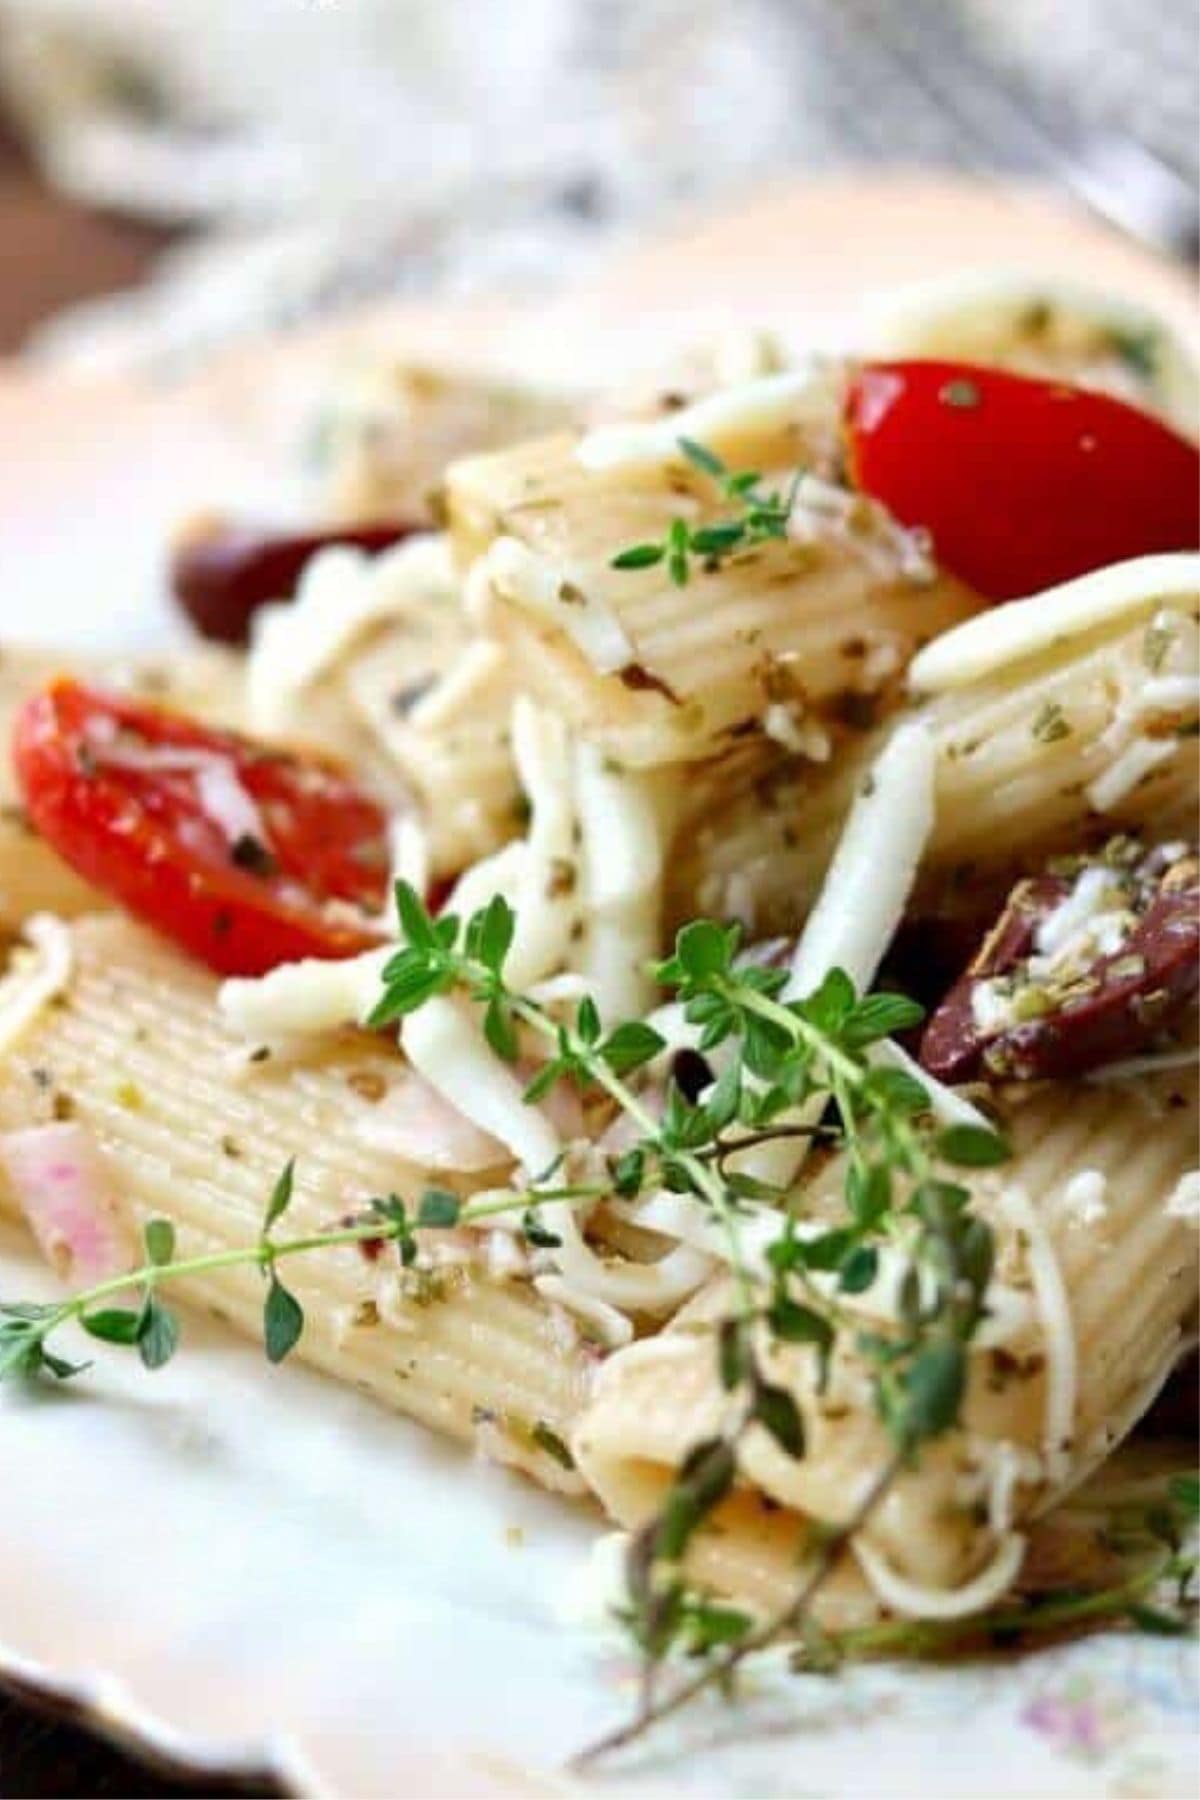 Closeup of pasta salad with fresh herbs, olives, and cherry tomatoes.